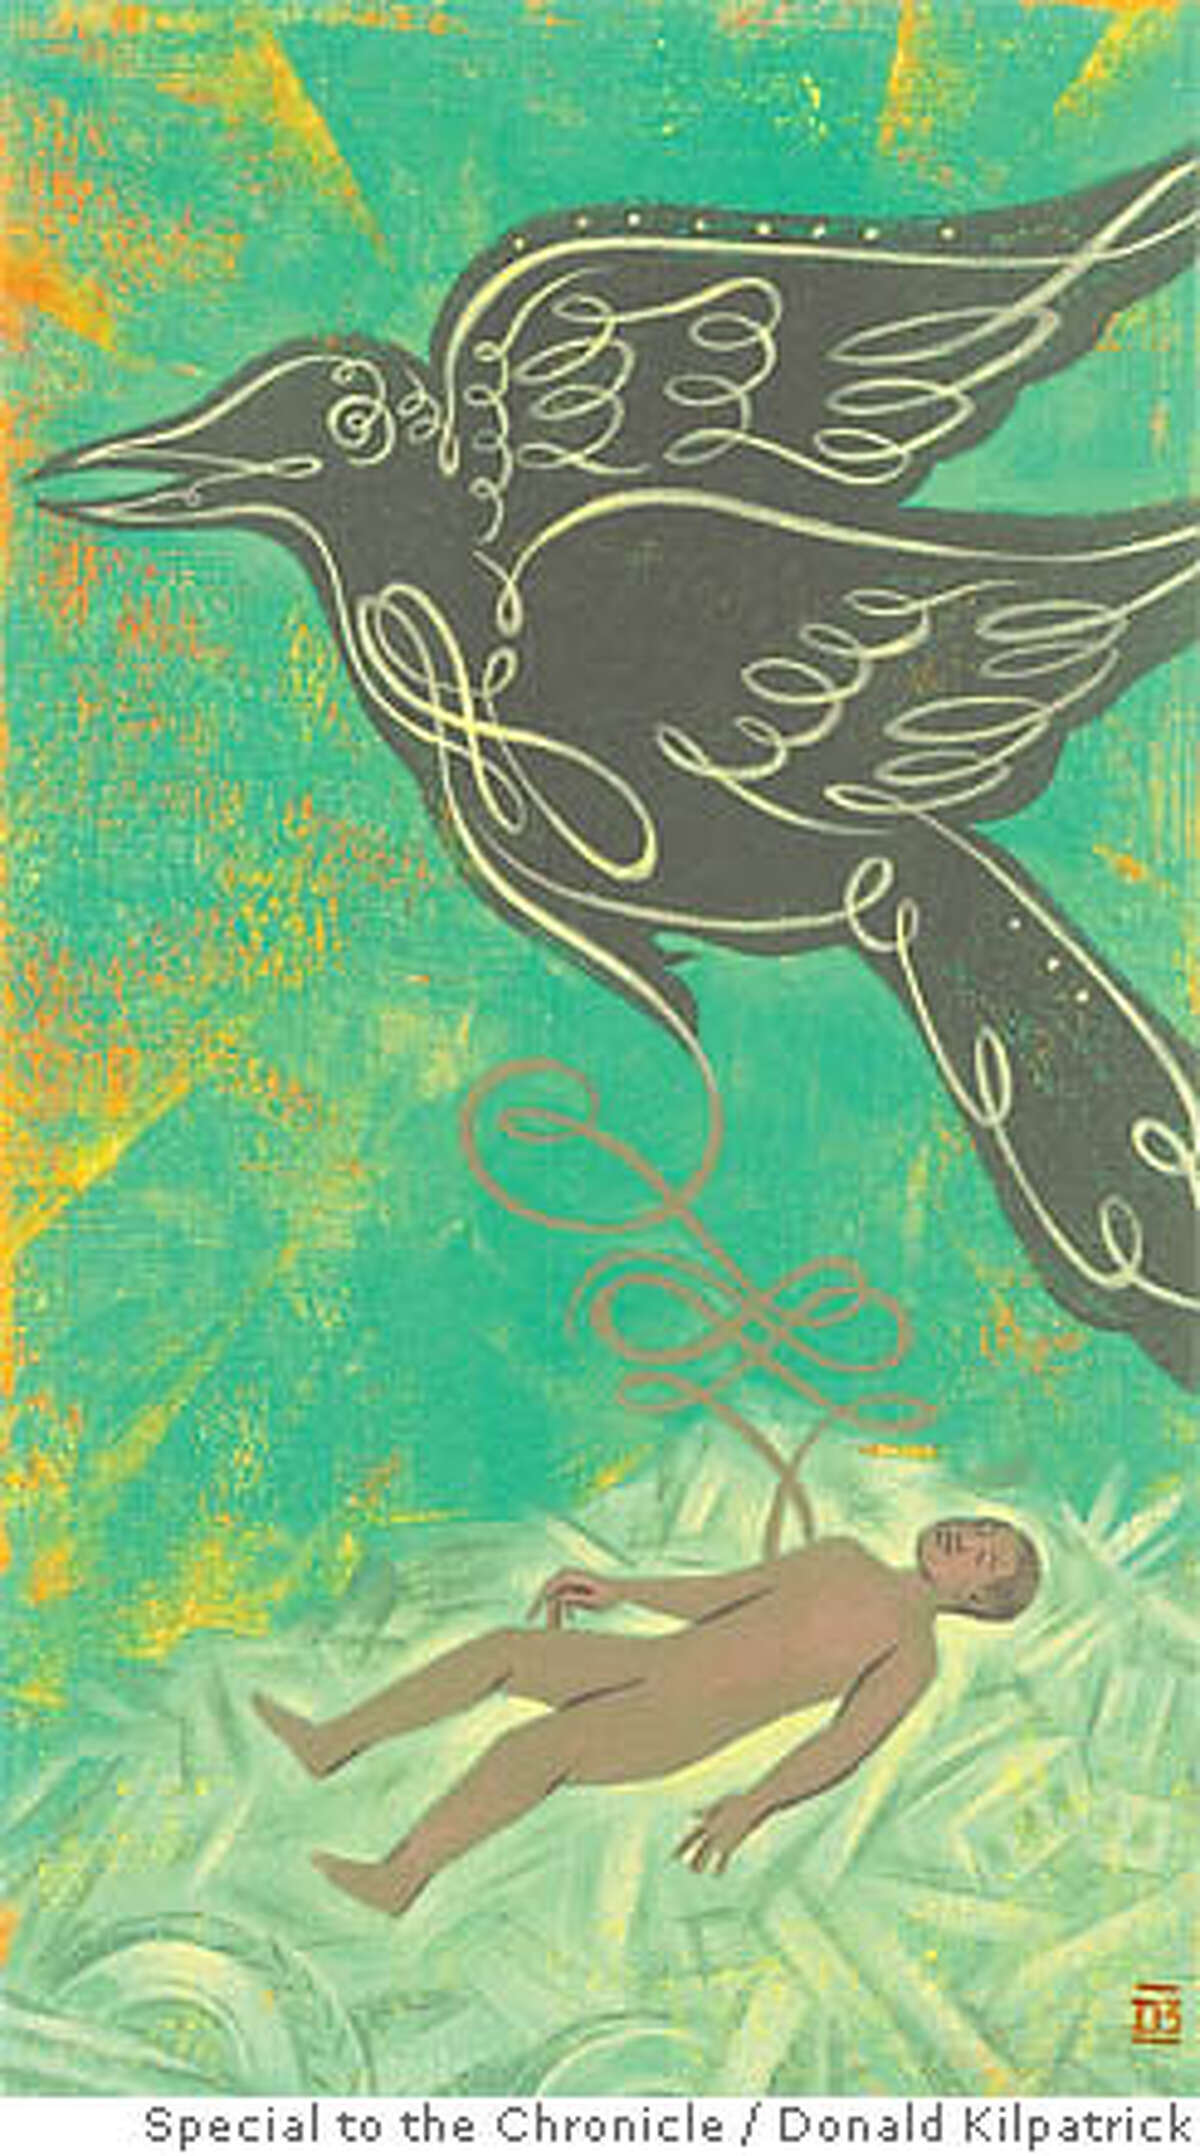 Allegory of post-colonial Africa takes flight. Illustration by Donald Kilpatrick, special to the Chronicle